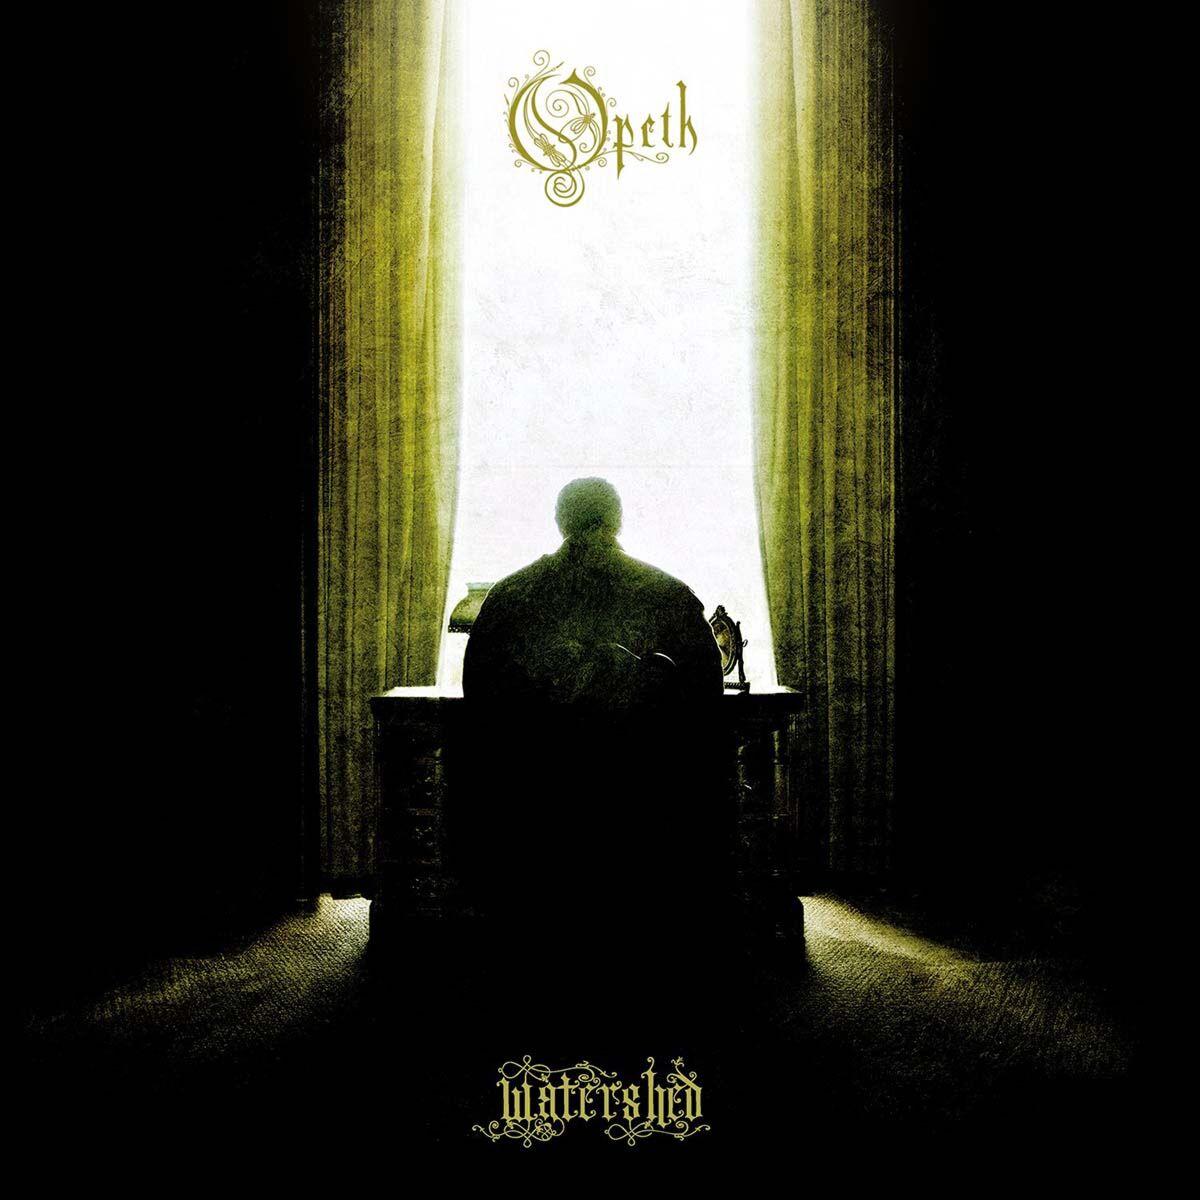 Opeth Watershed 2LP